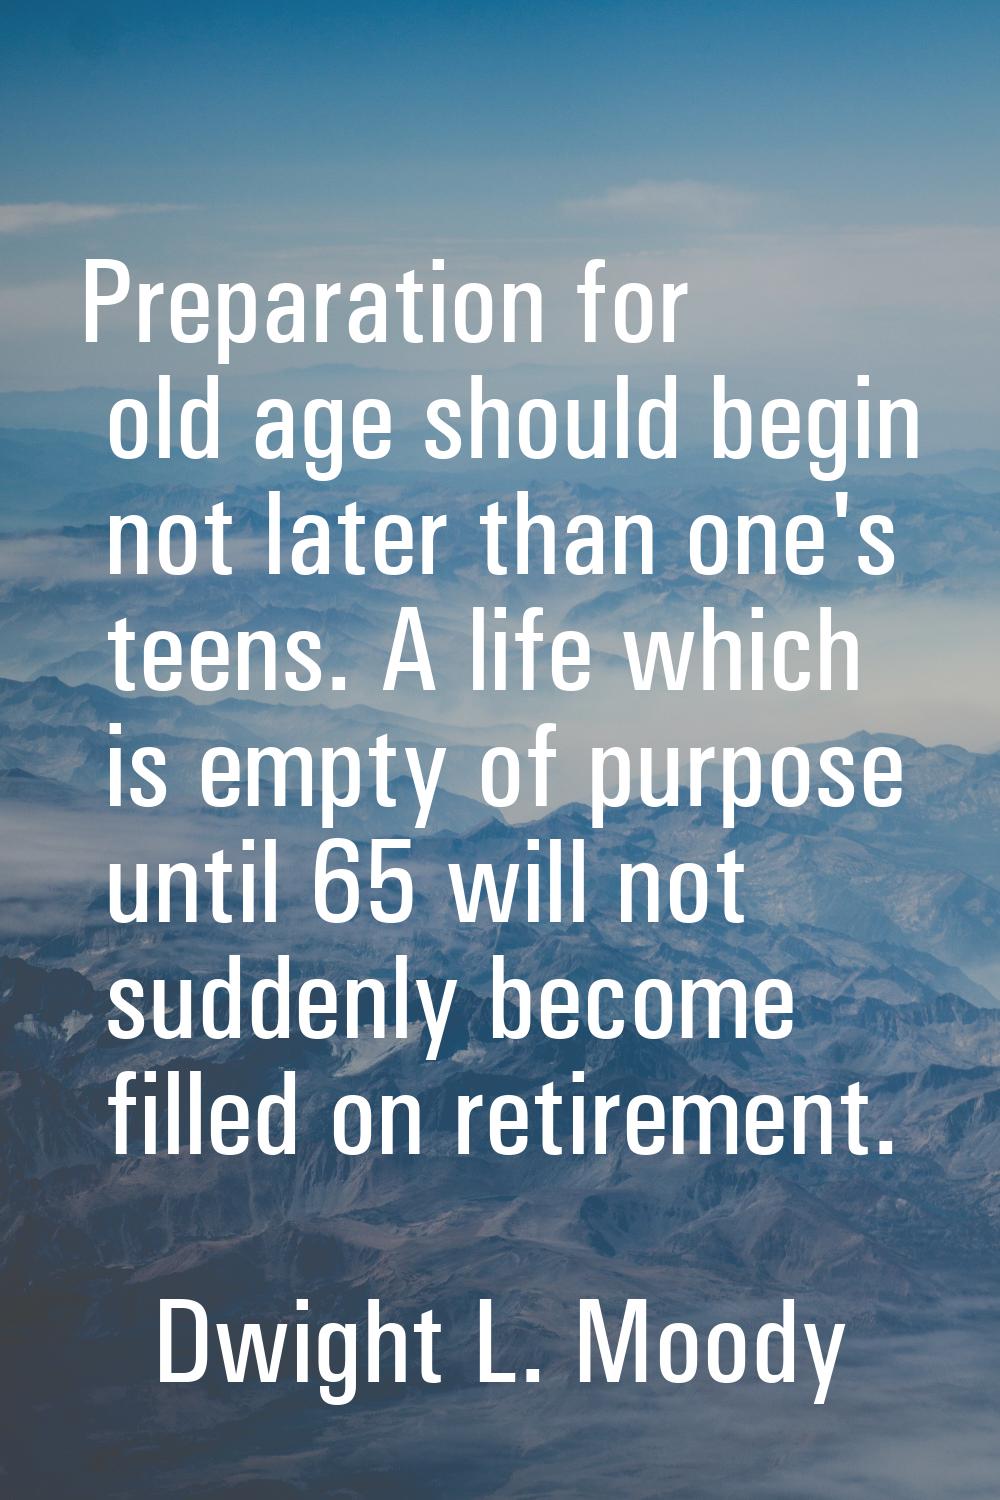 Preparation for old age should begin not later than one's teens. A life which is empty of purpose u